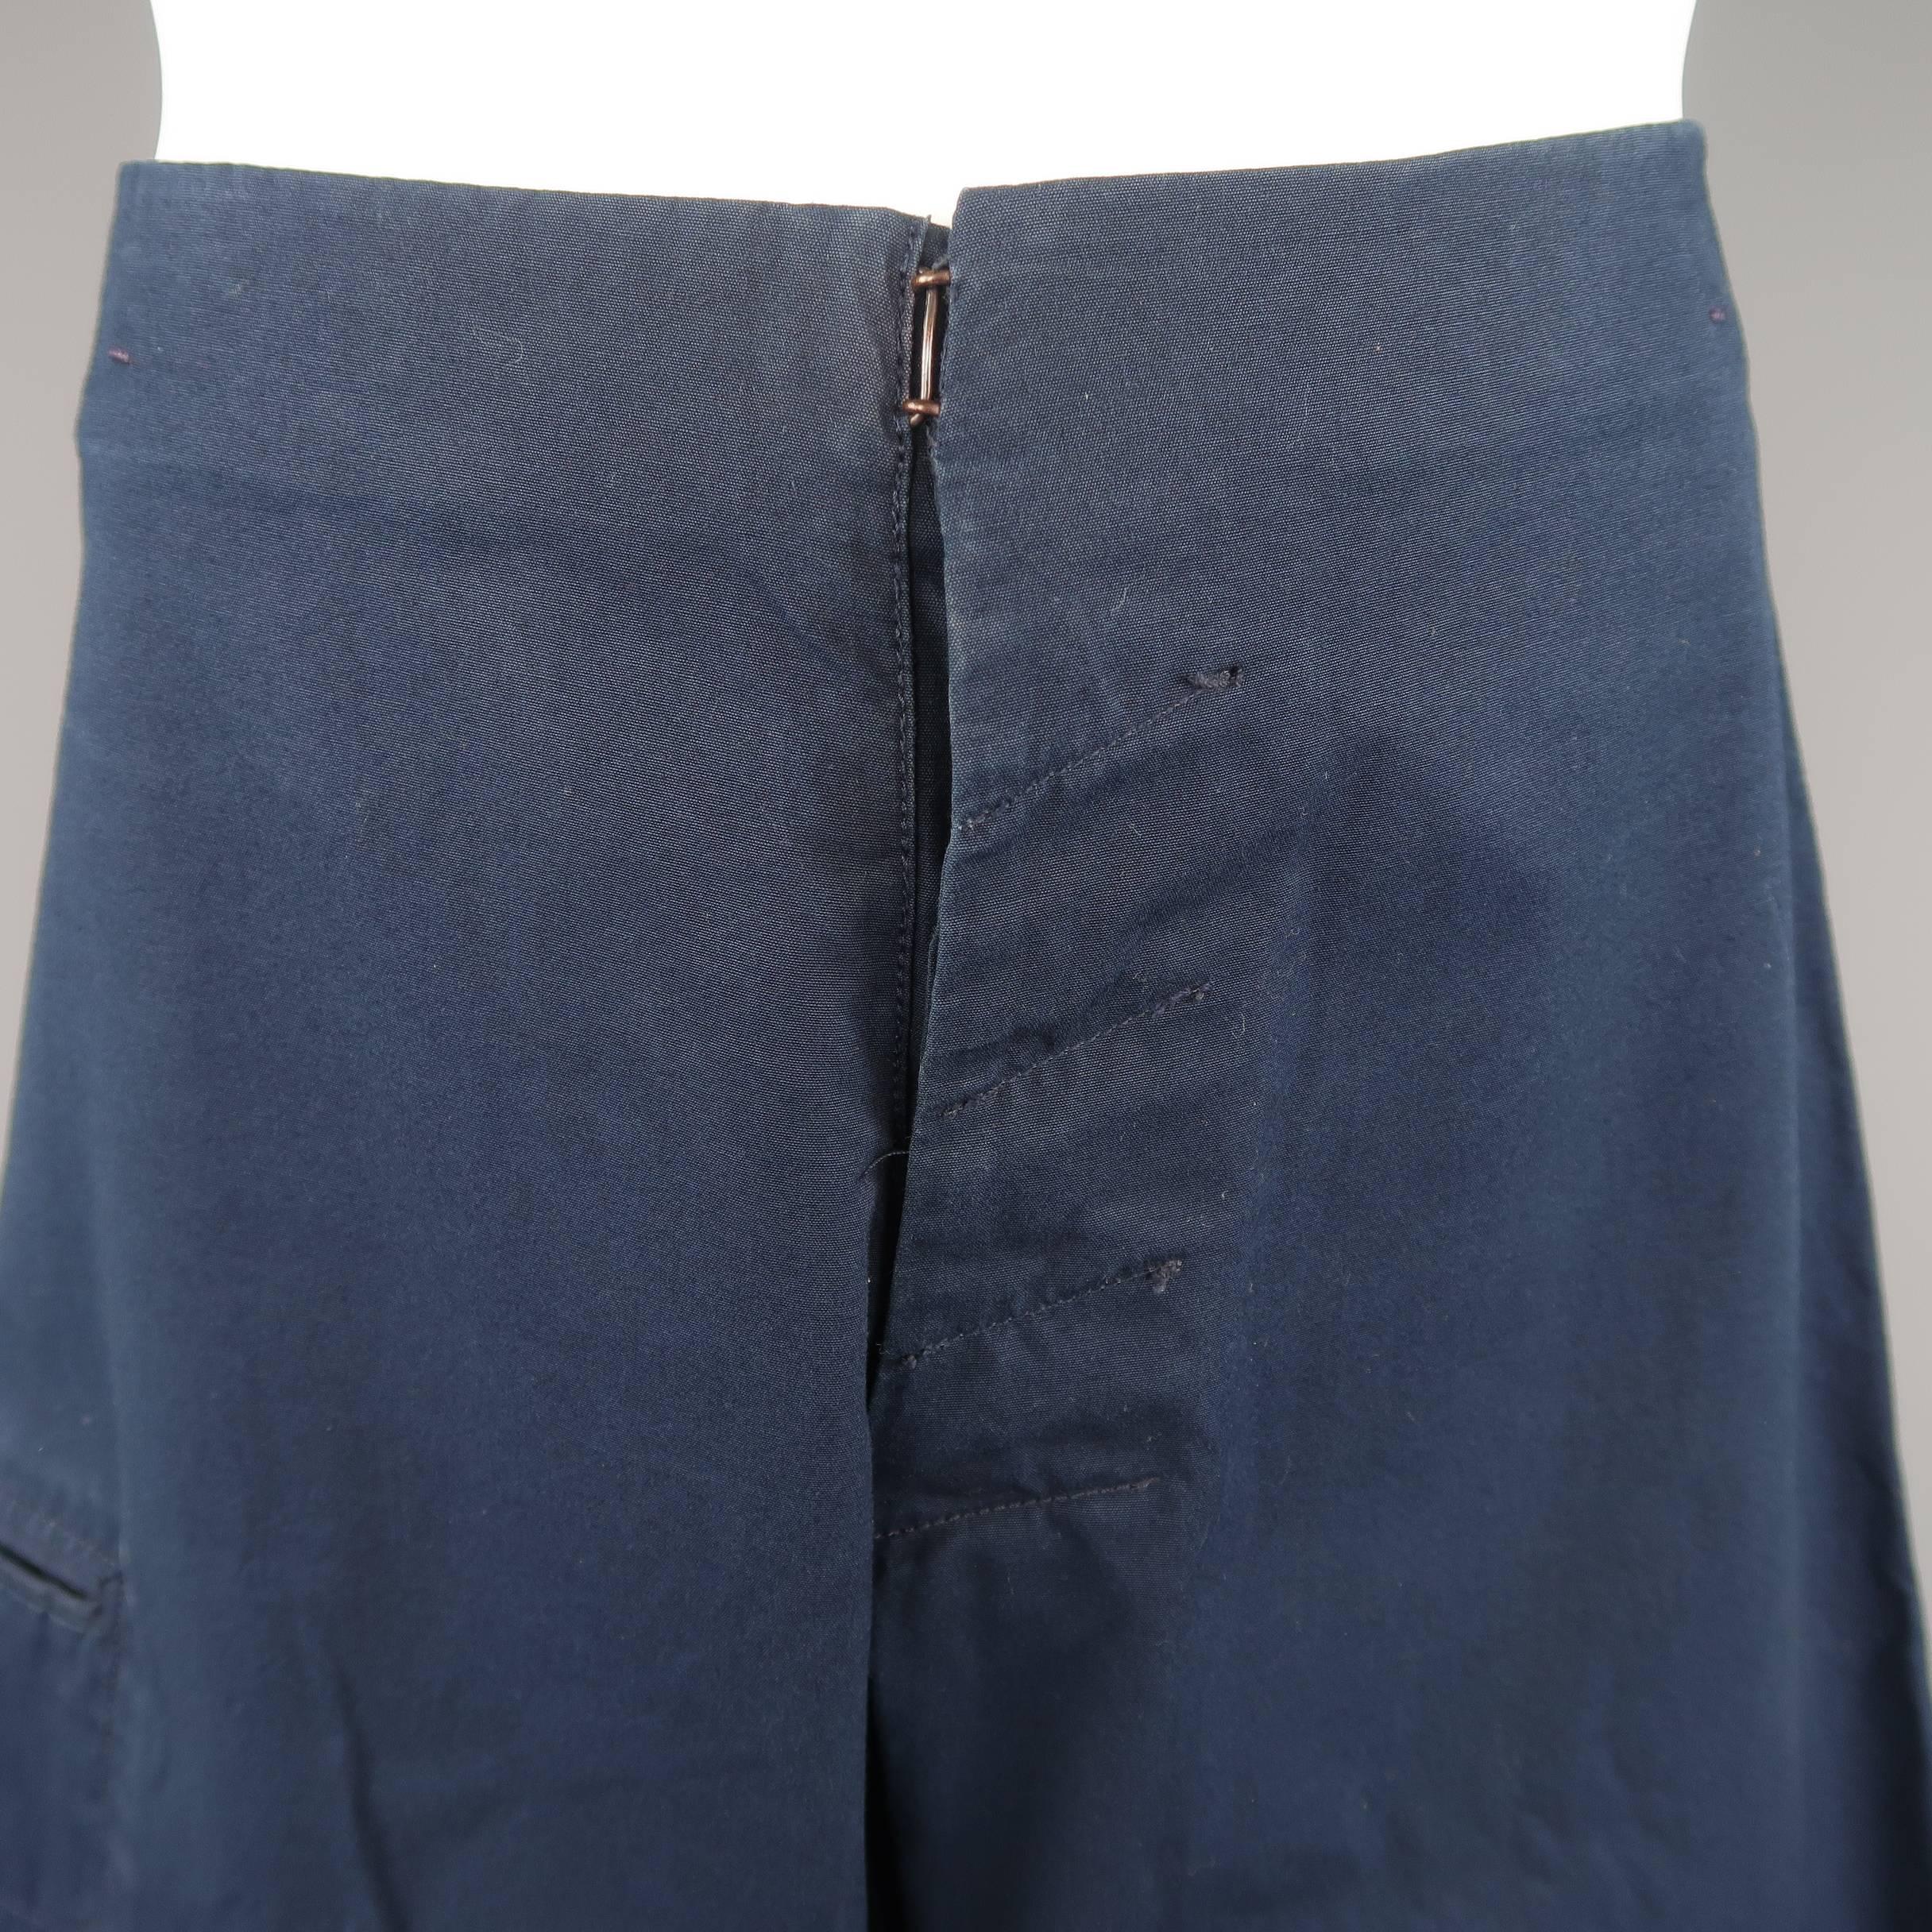 MAISON MARTIN MARGIELA wide leg pants come in navy blue cotton chino with a a seamless waist, hidden button hook eye closure fly, side pocket, and signature white stitch back. With tags. Made in Italy.
 
Excellent Pre-Owned Condition.
Marked: IT 46
